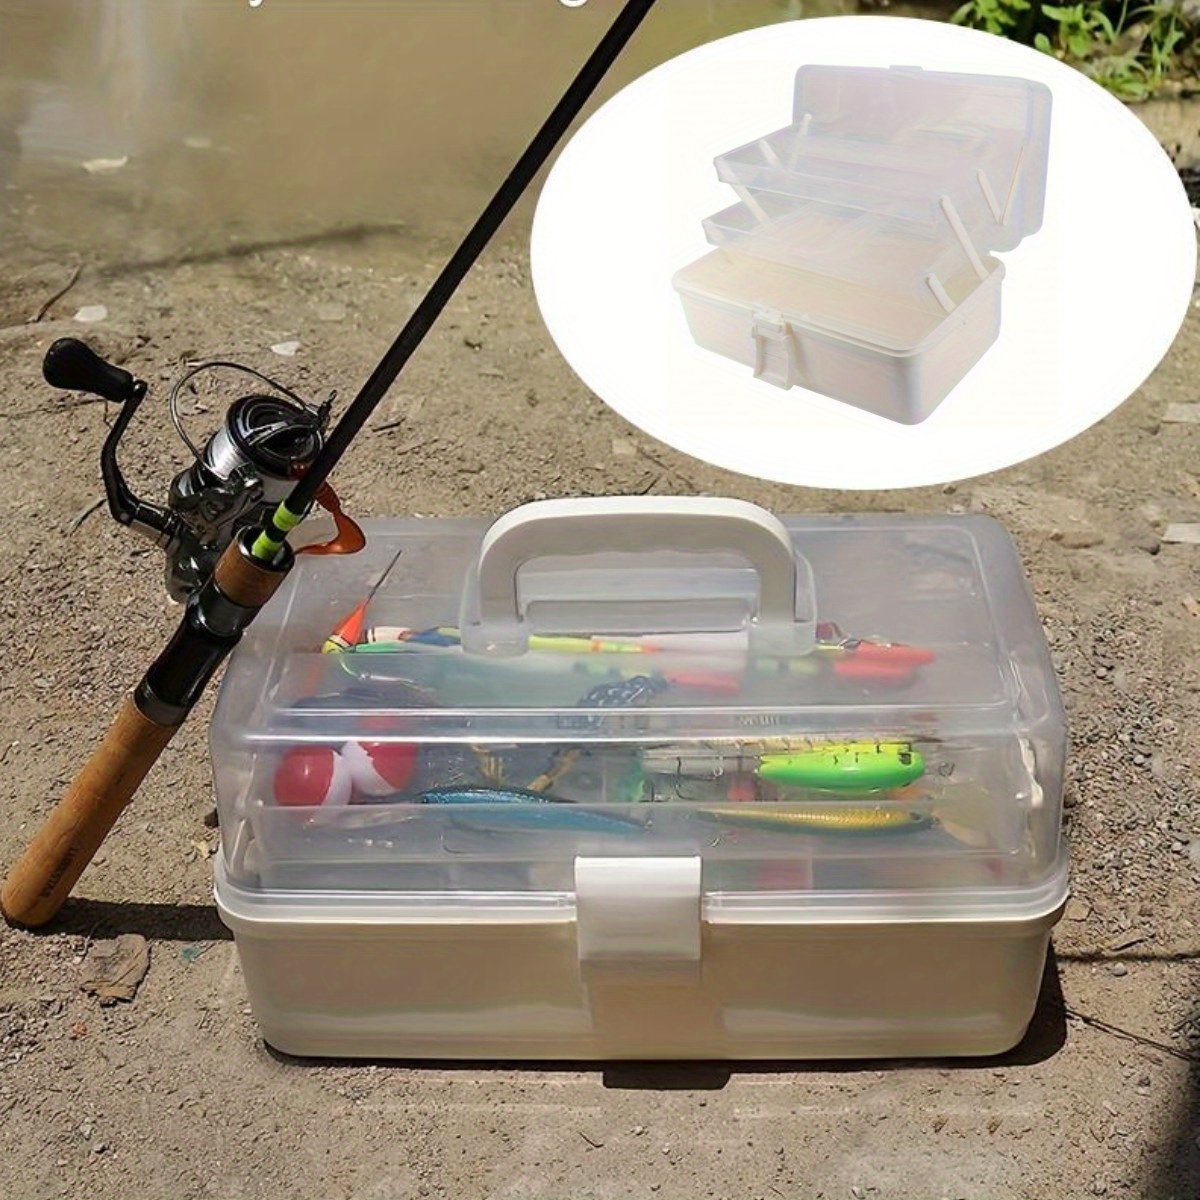 

1pc Pp Fishing Tackle Storage Box For Hooks, Lures, And Baits - Portable Fishing Accessories Organizer